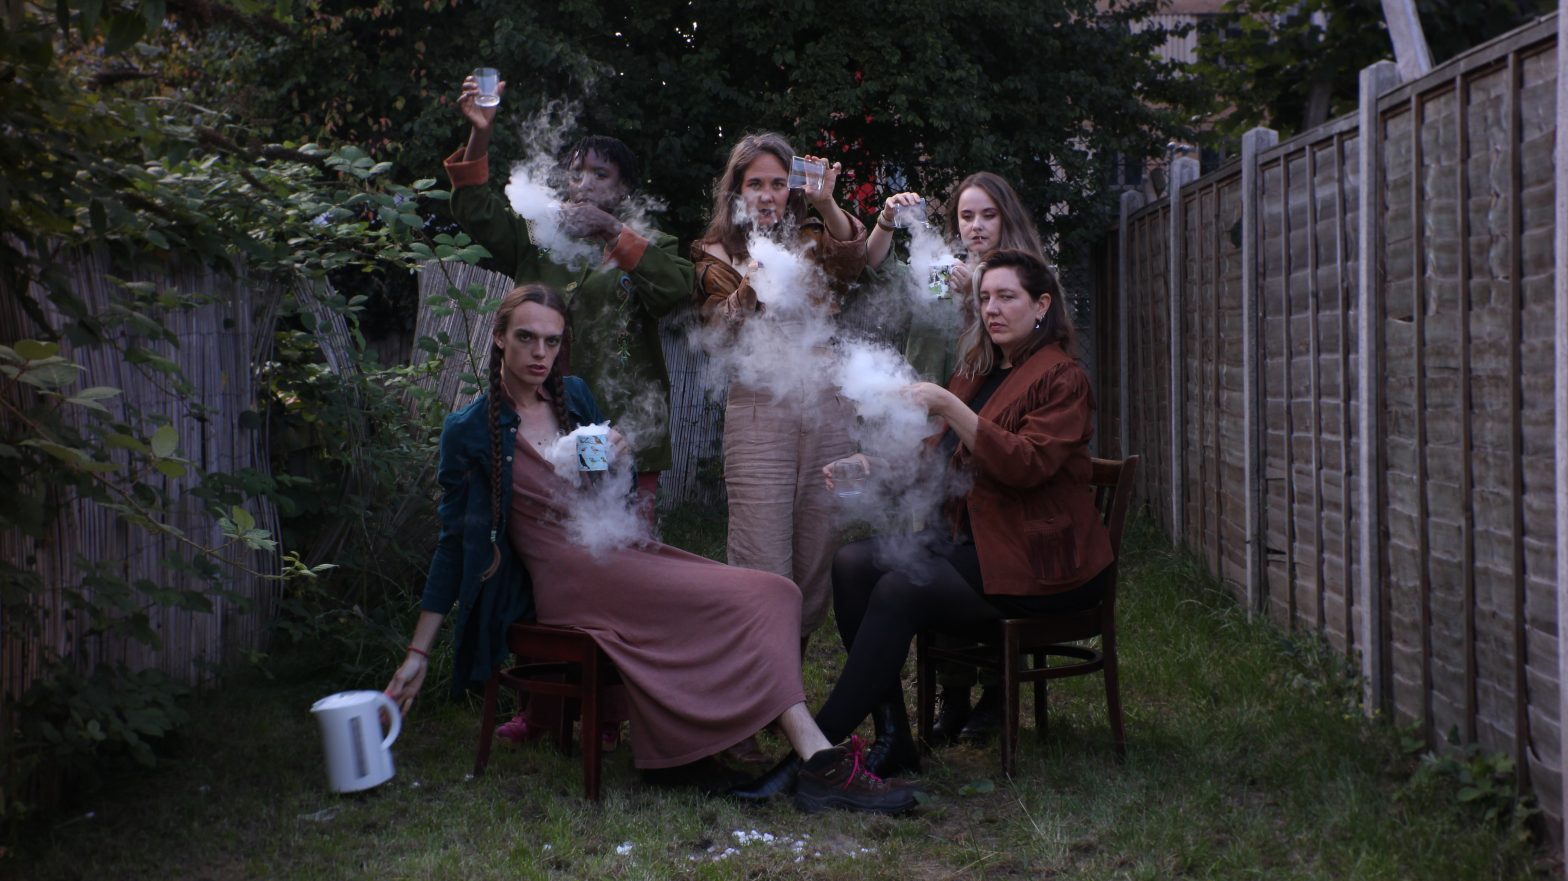 Group of 5 people sitting in a garden holding steaming teacups and a kettle.